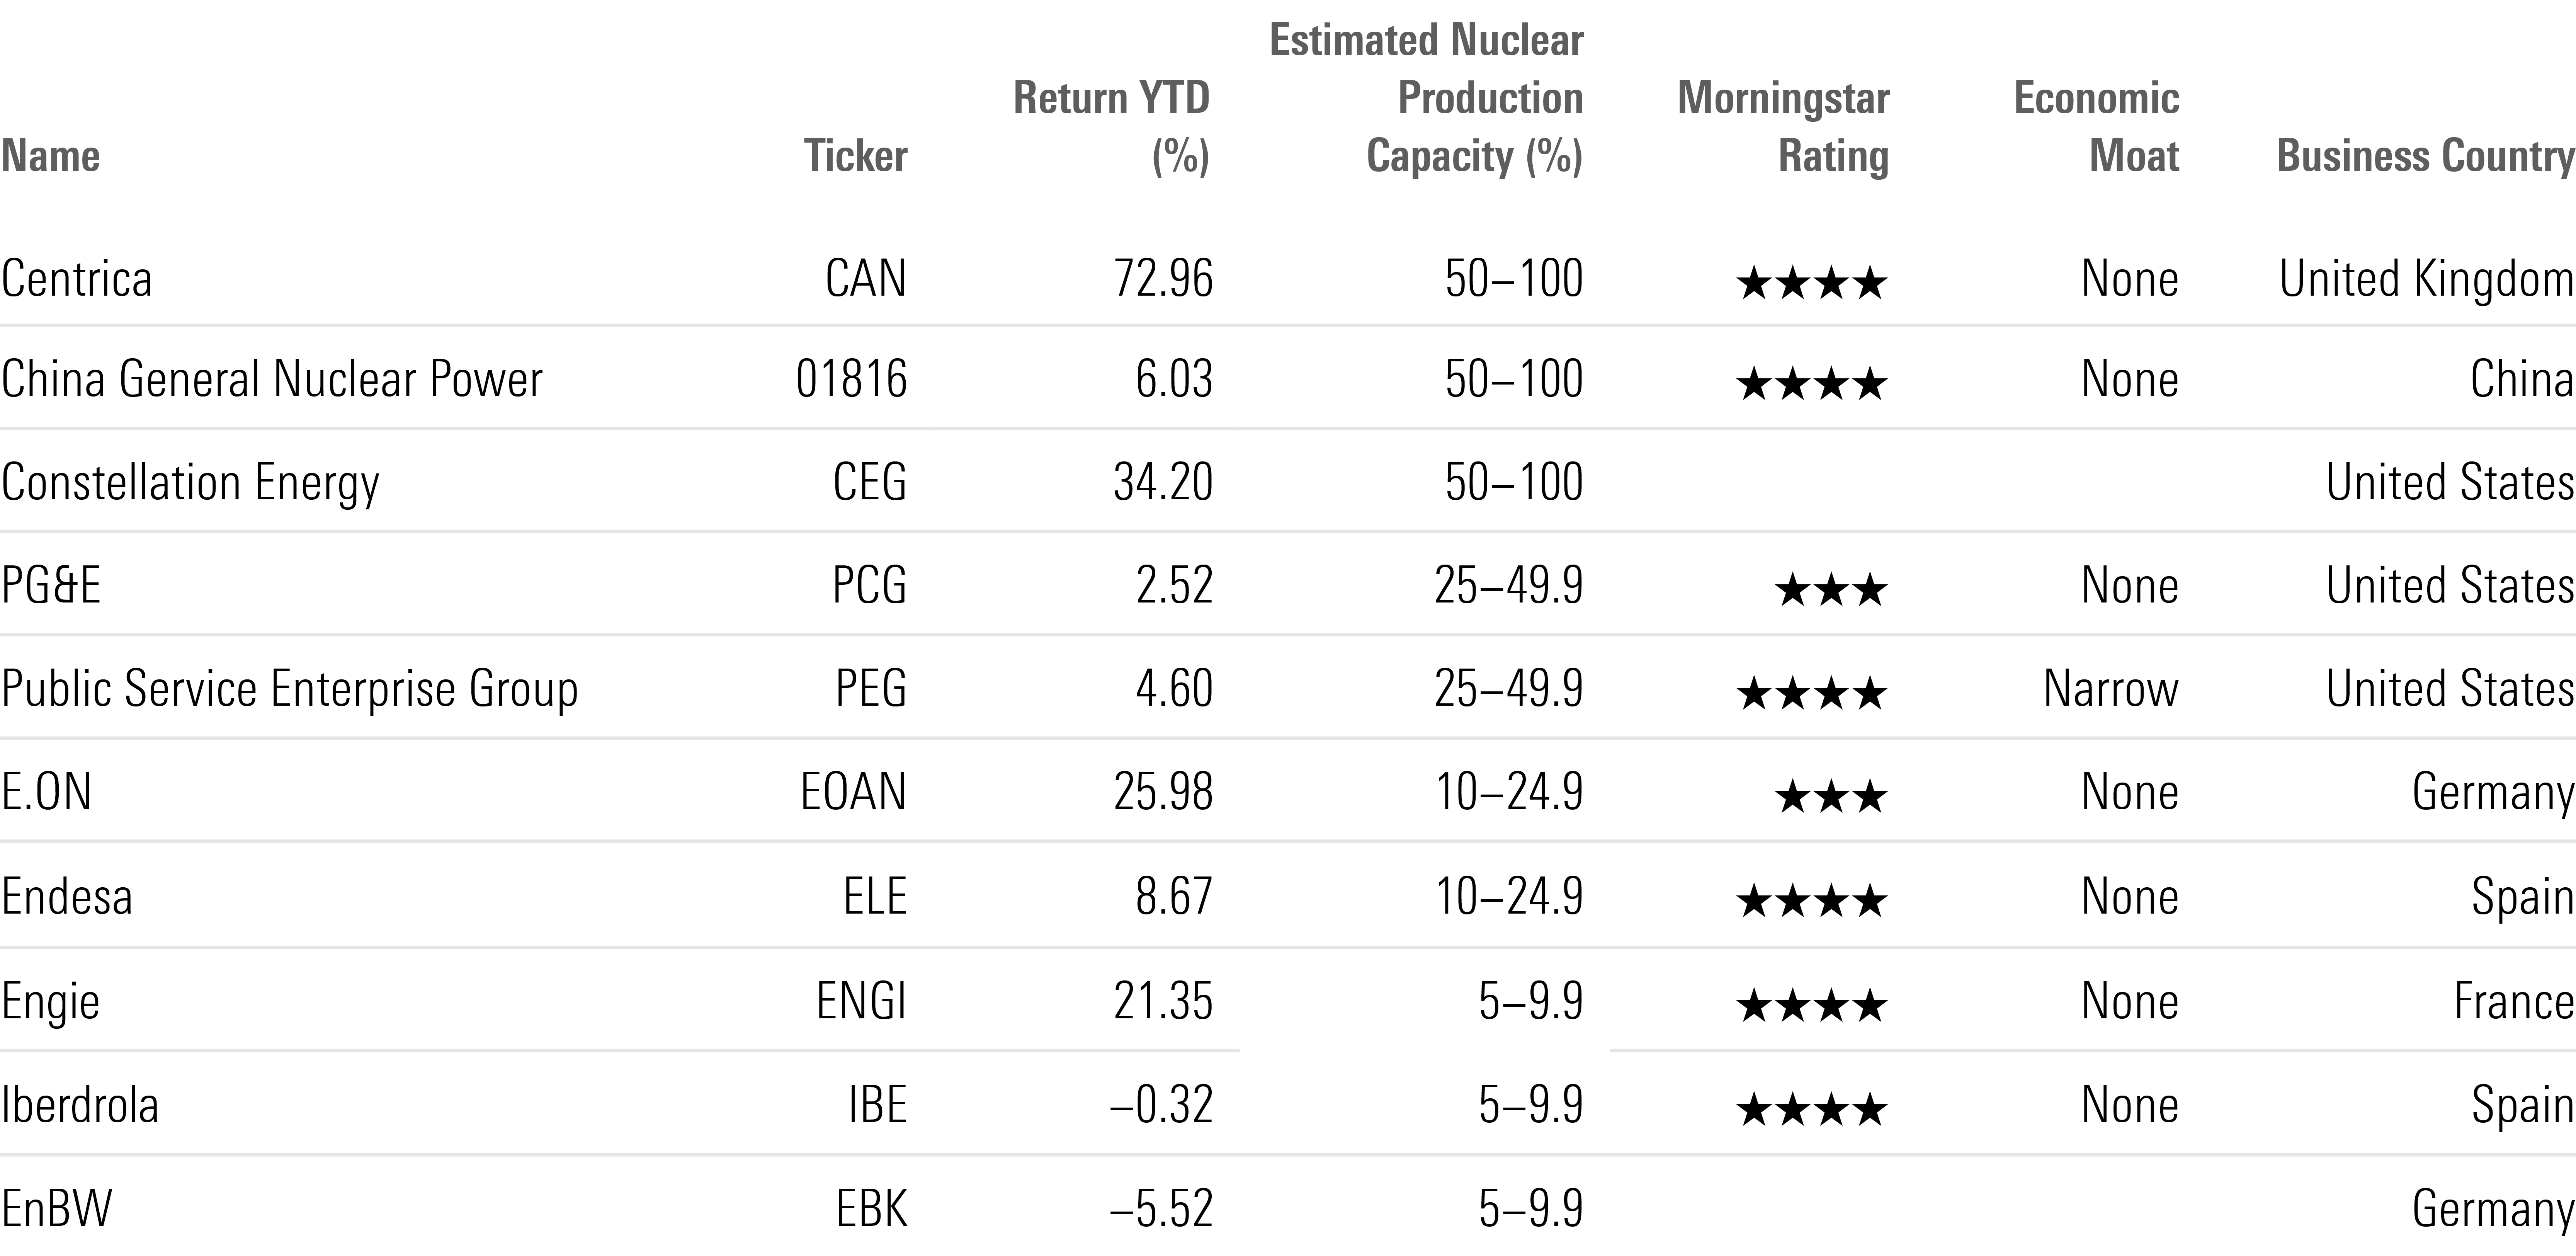 Some Nuclear-Related Stocks